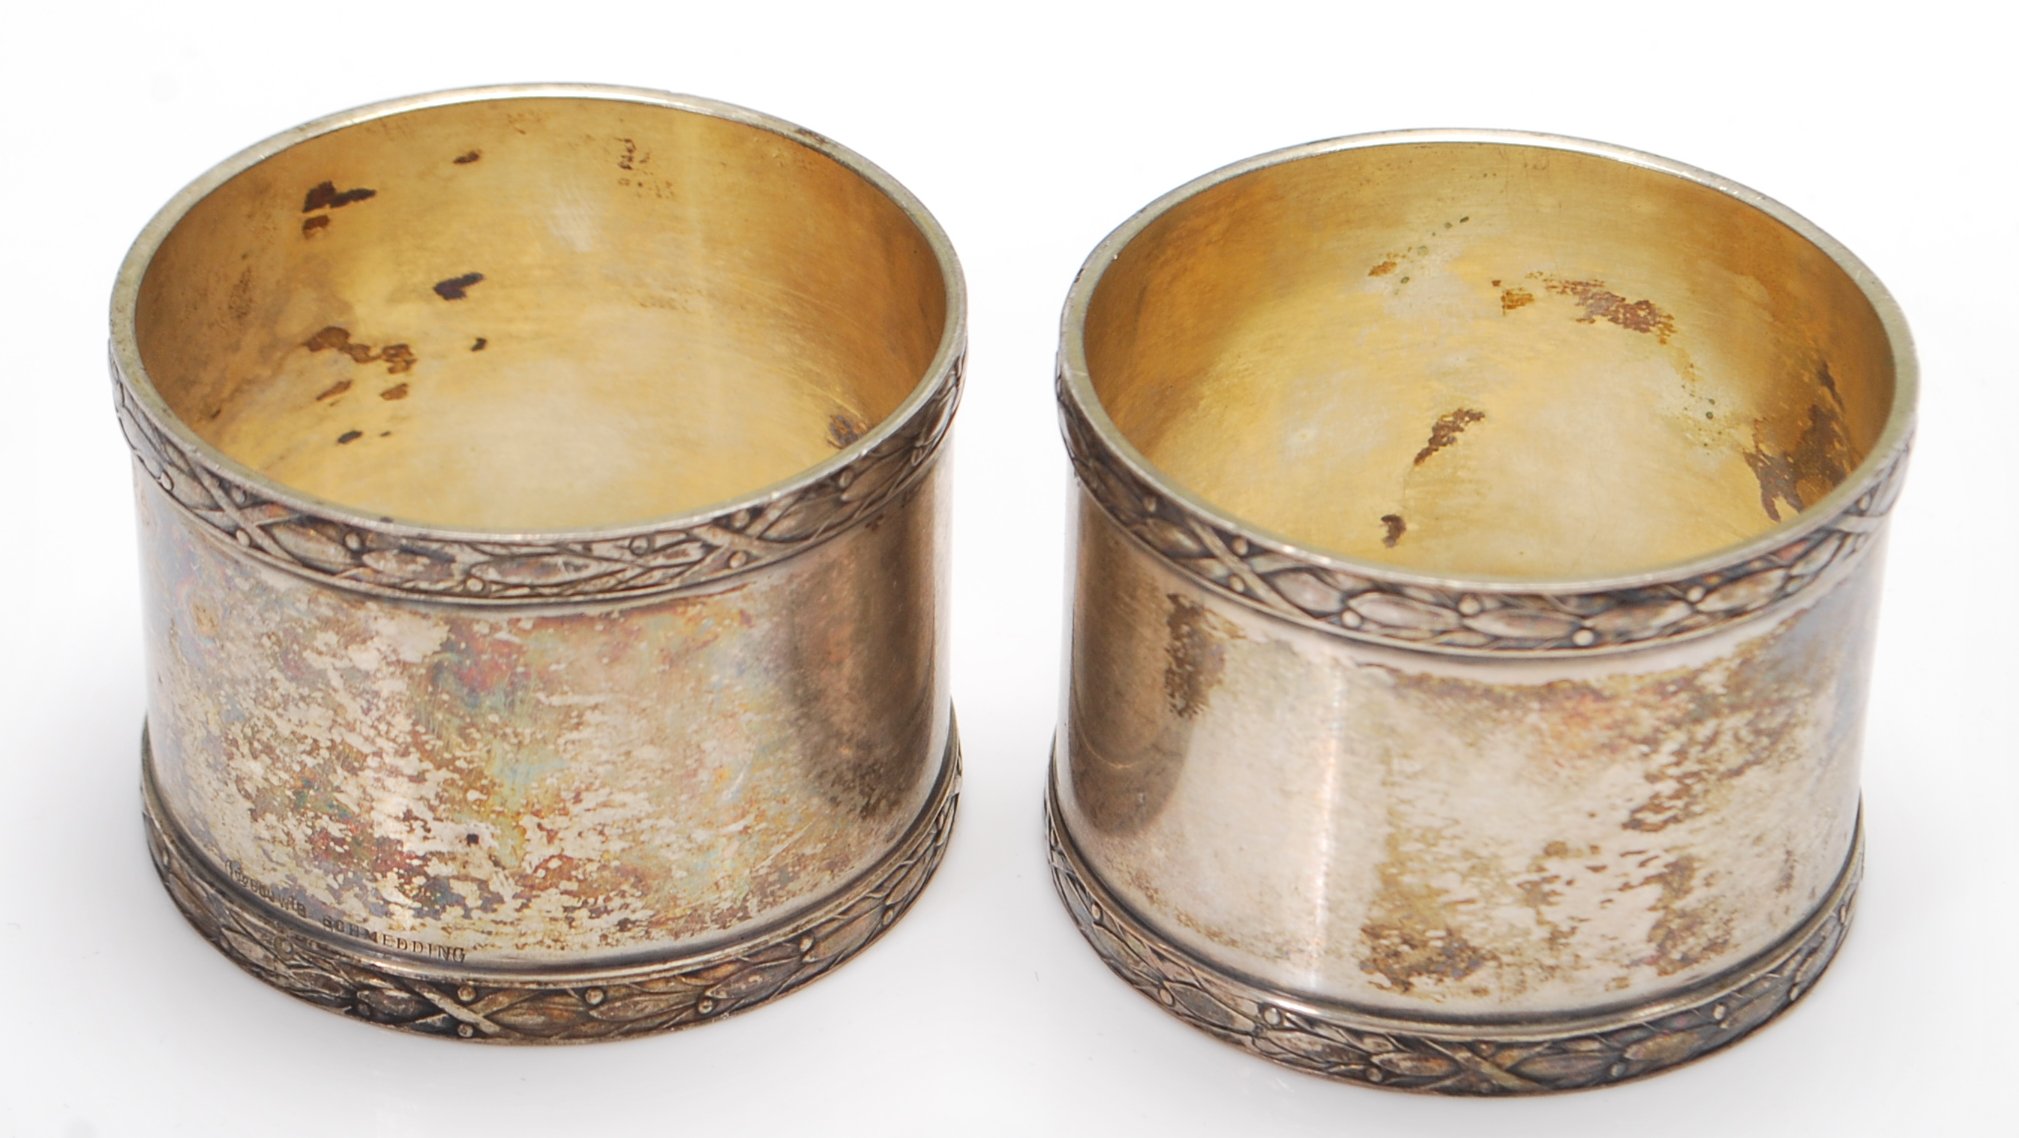 PAIR OF ANTIQUE GERMAN SILVER NAPKIN RINGS - Image 2 of 5